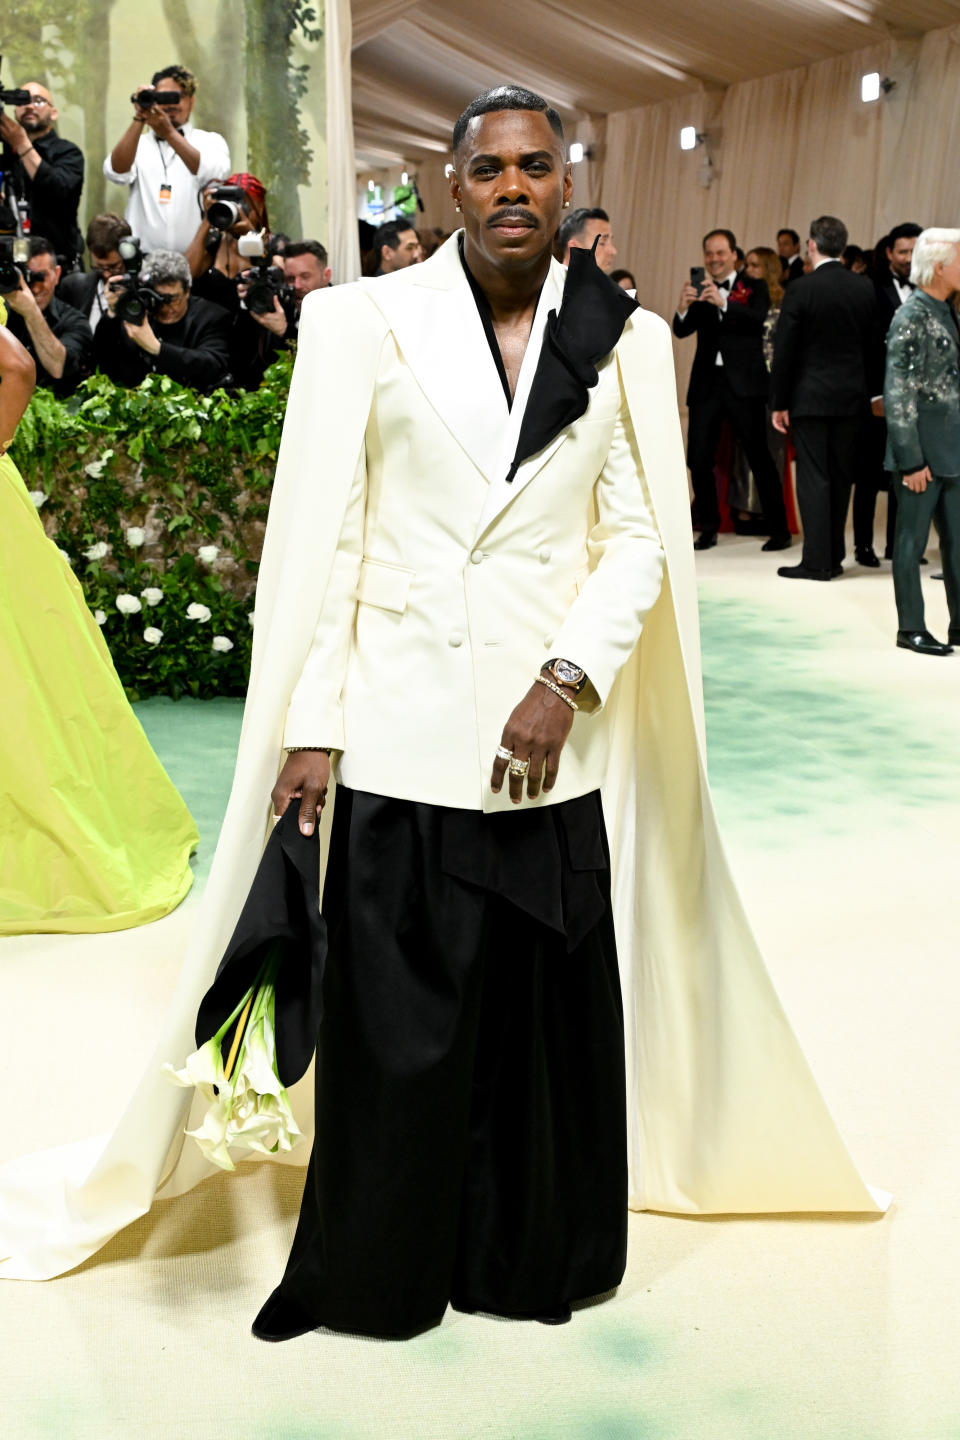 Colman Domingo in an avant-garde white jacket with a back cape and black trousers at a high-profile event